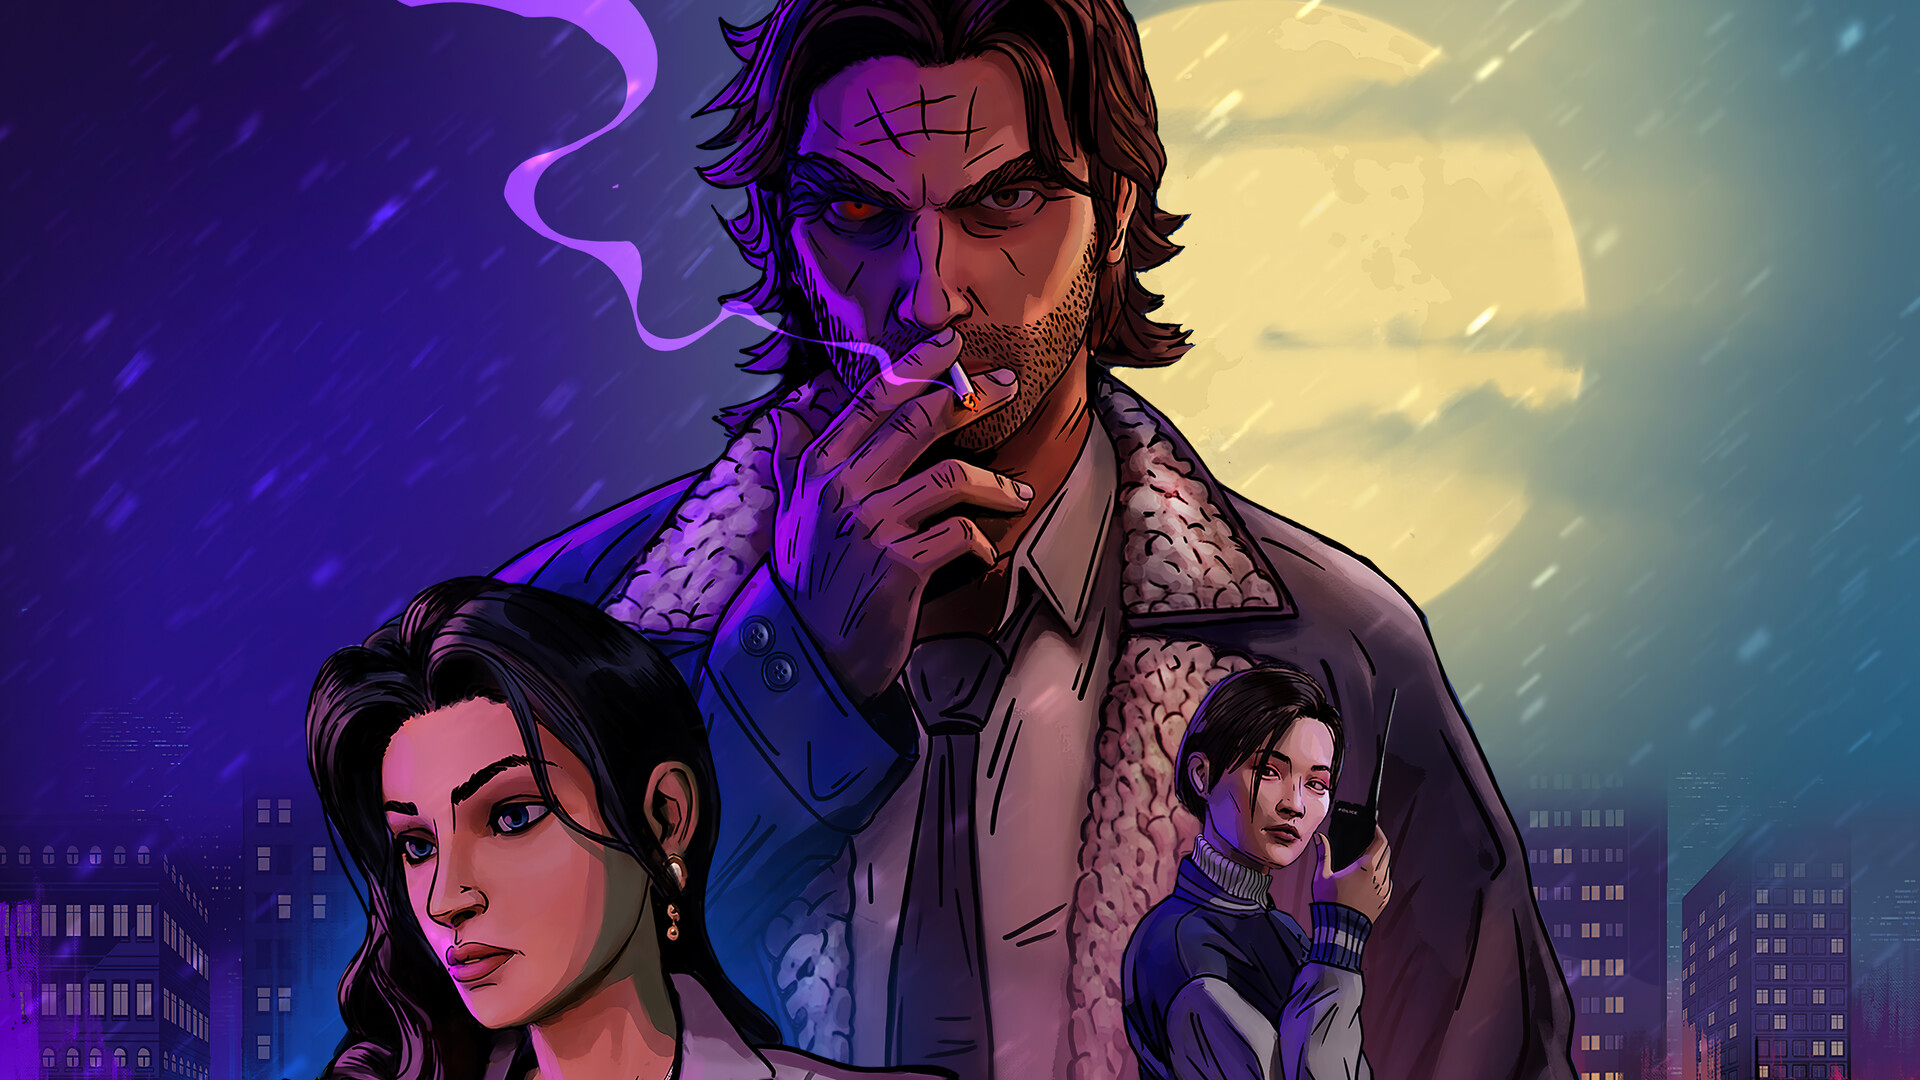 The Wolf Among Us The Big Bad Wolf Telltale Games PC Gaming Video Games A Telltale Games Series Smok 1920x1080